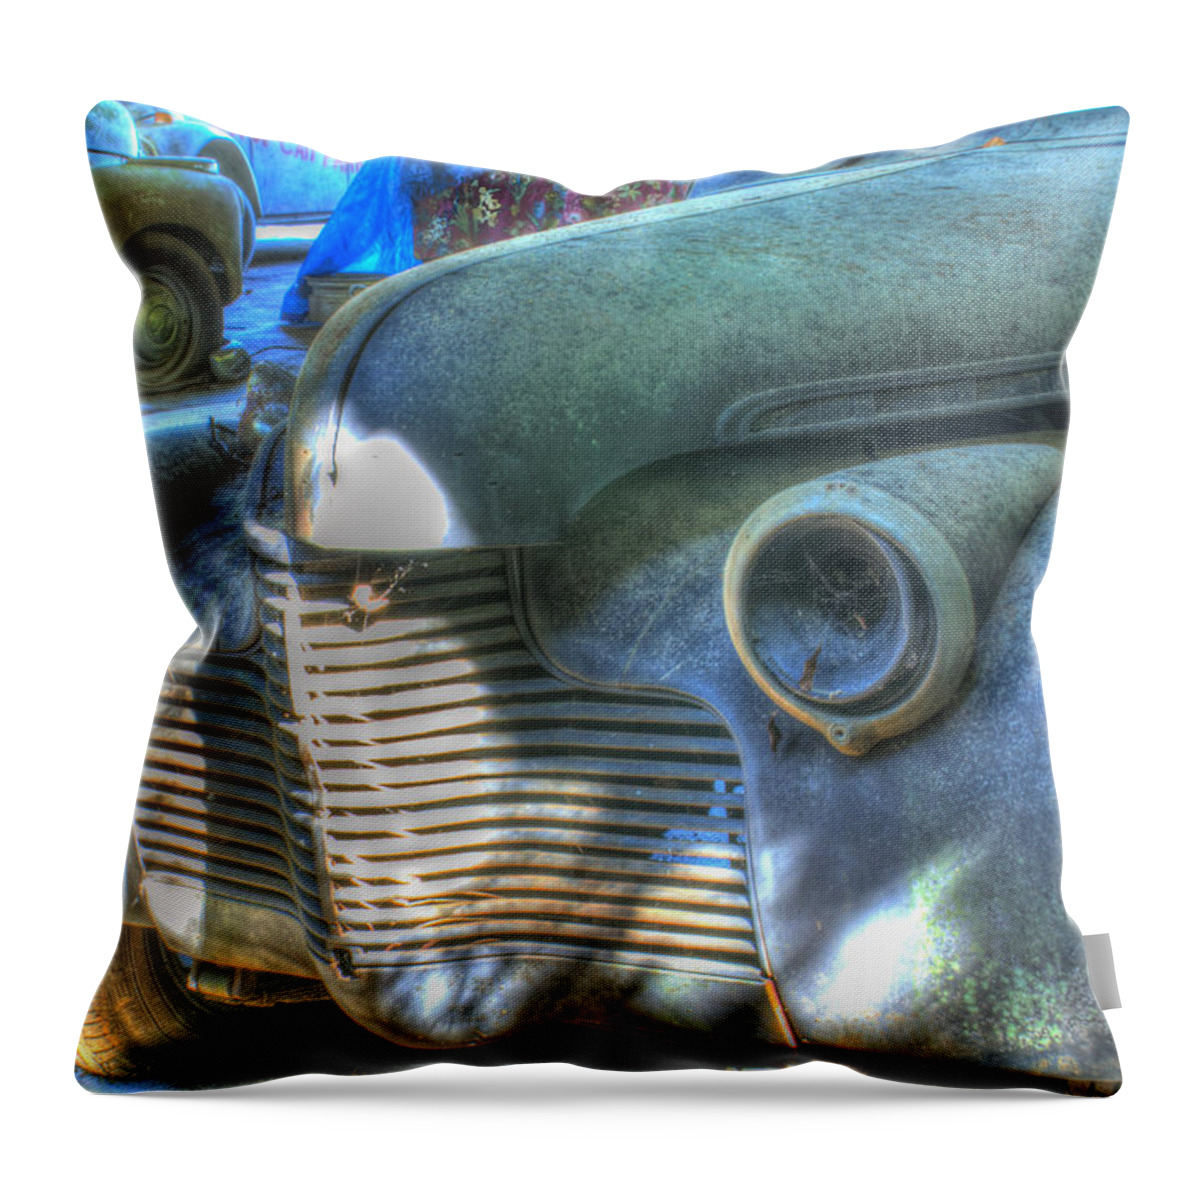 1940s Throw Pillow featuring the photograph 1940s Antique Chevrolet Hood View by Douglas Barnett